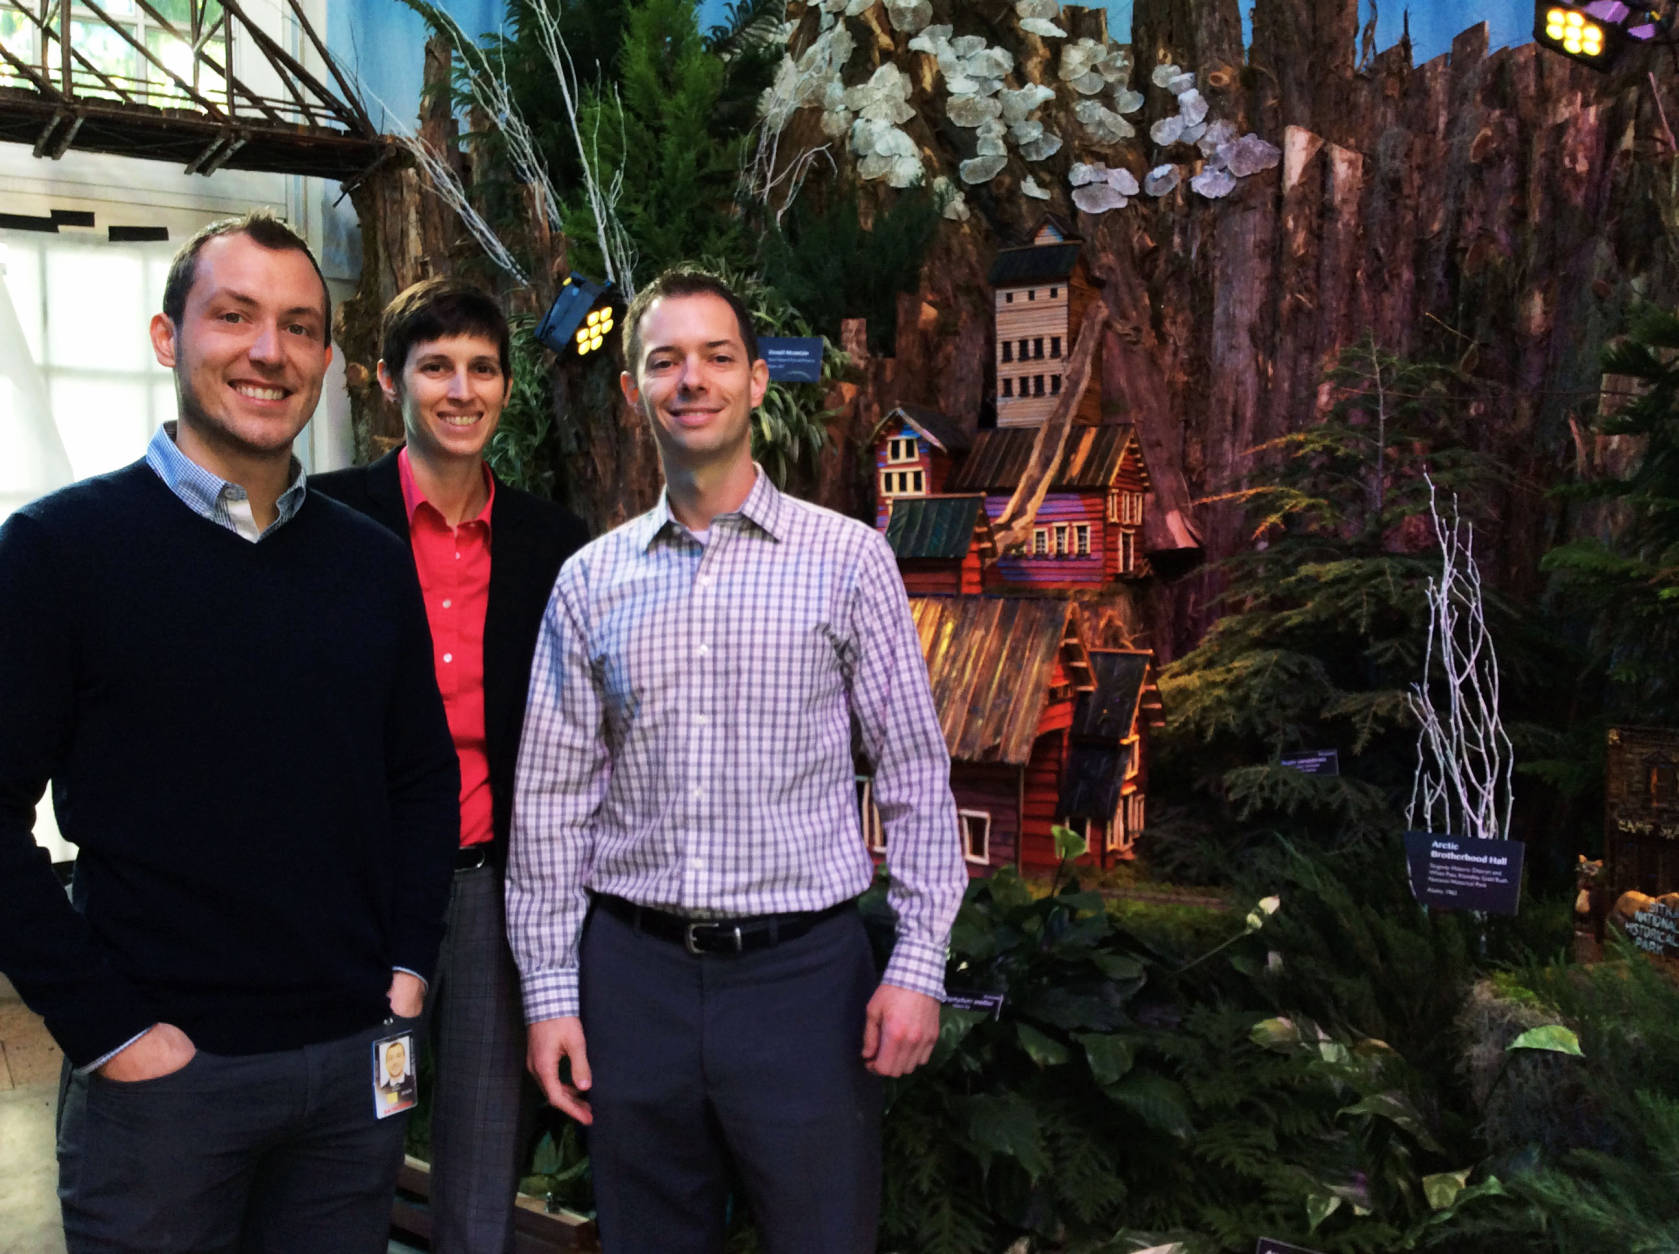 Devin Dotson (right) public affairs and exhibits specialist for the U.S. Botanic Garden, stands with two of his colleagues in front of a holiday exhibit feature. (WTOP/Hanna Choi)